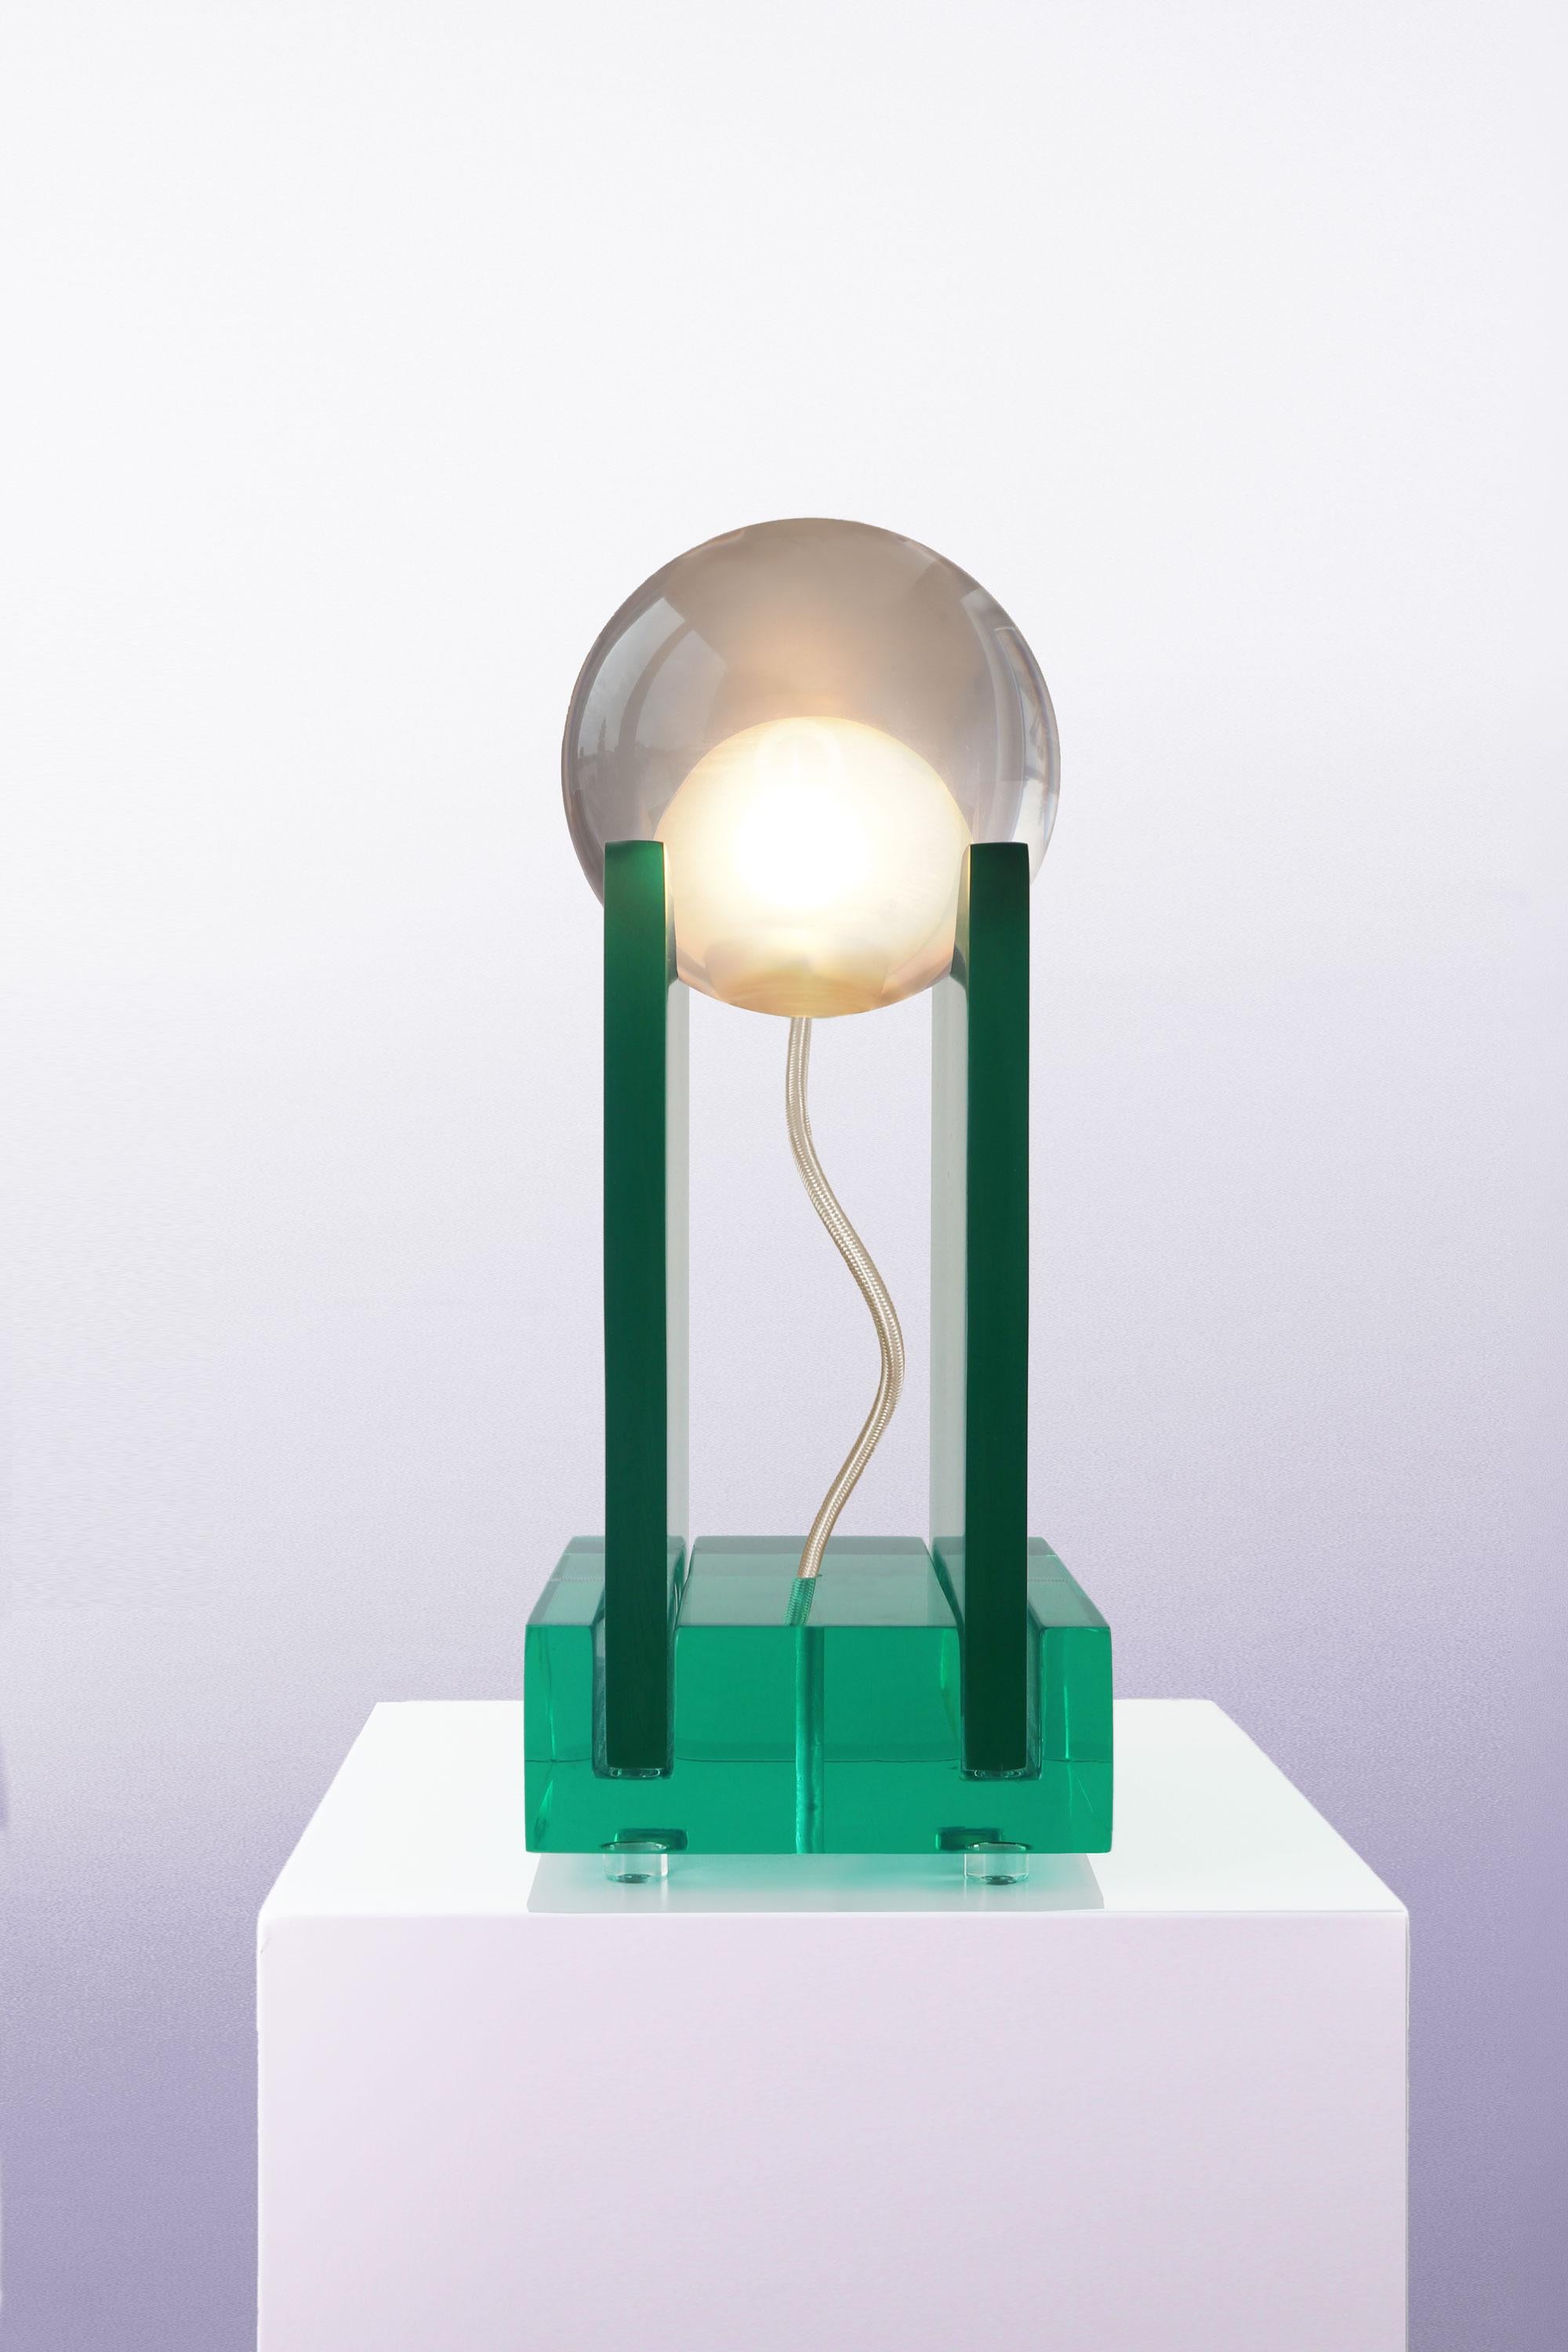 Inspired by Renaissance-era floor plans of Italian villas, the bulb of Adrian Cruz's Rotonda Table Lamp is held up by two plates in crystal resin, resting on a pedestal of monochromatic green and displaying a weightless balancing act. Due to